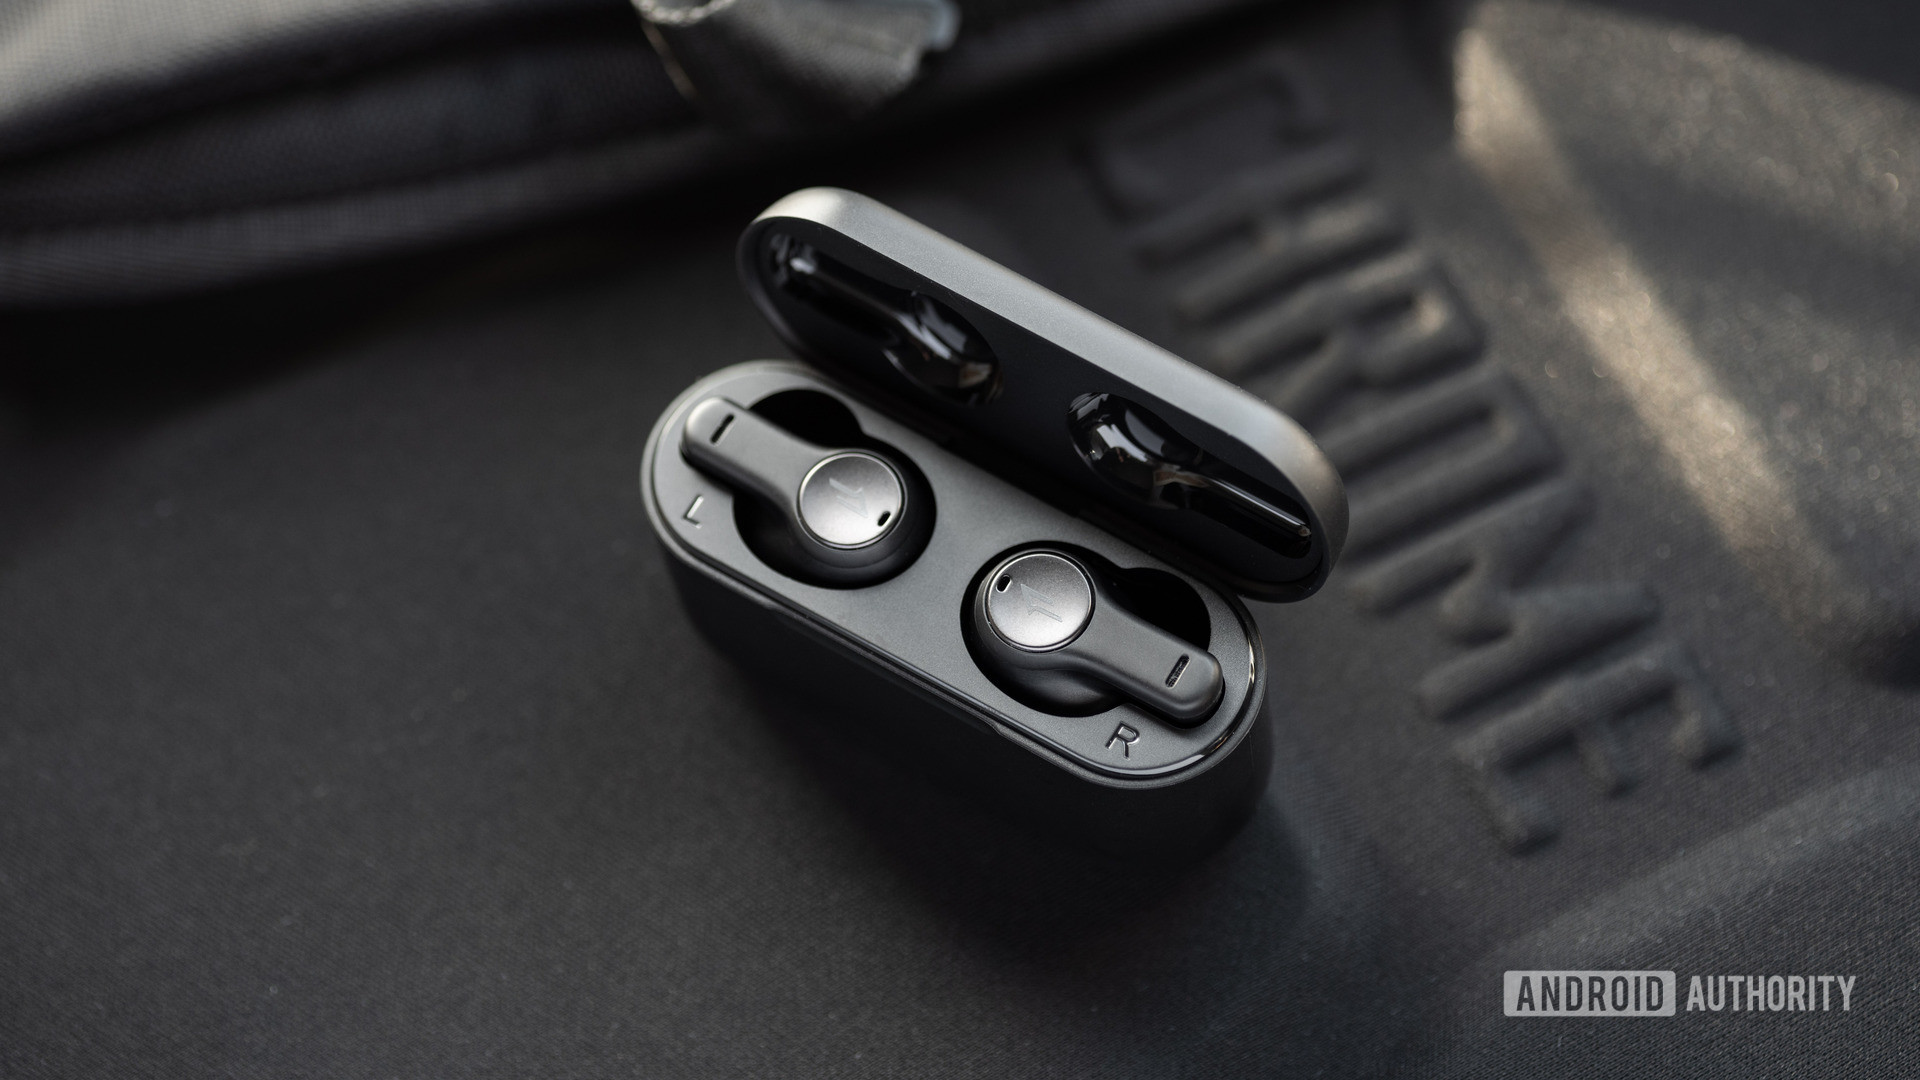 The 1MORE PistonBuds cheap true wireless earbuds sit in the open charging case against a black background.